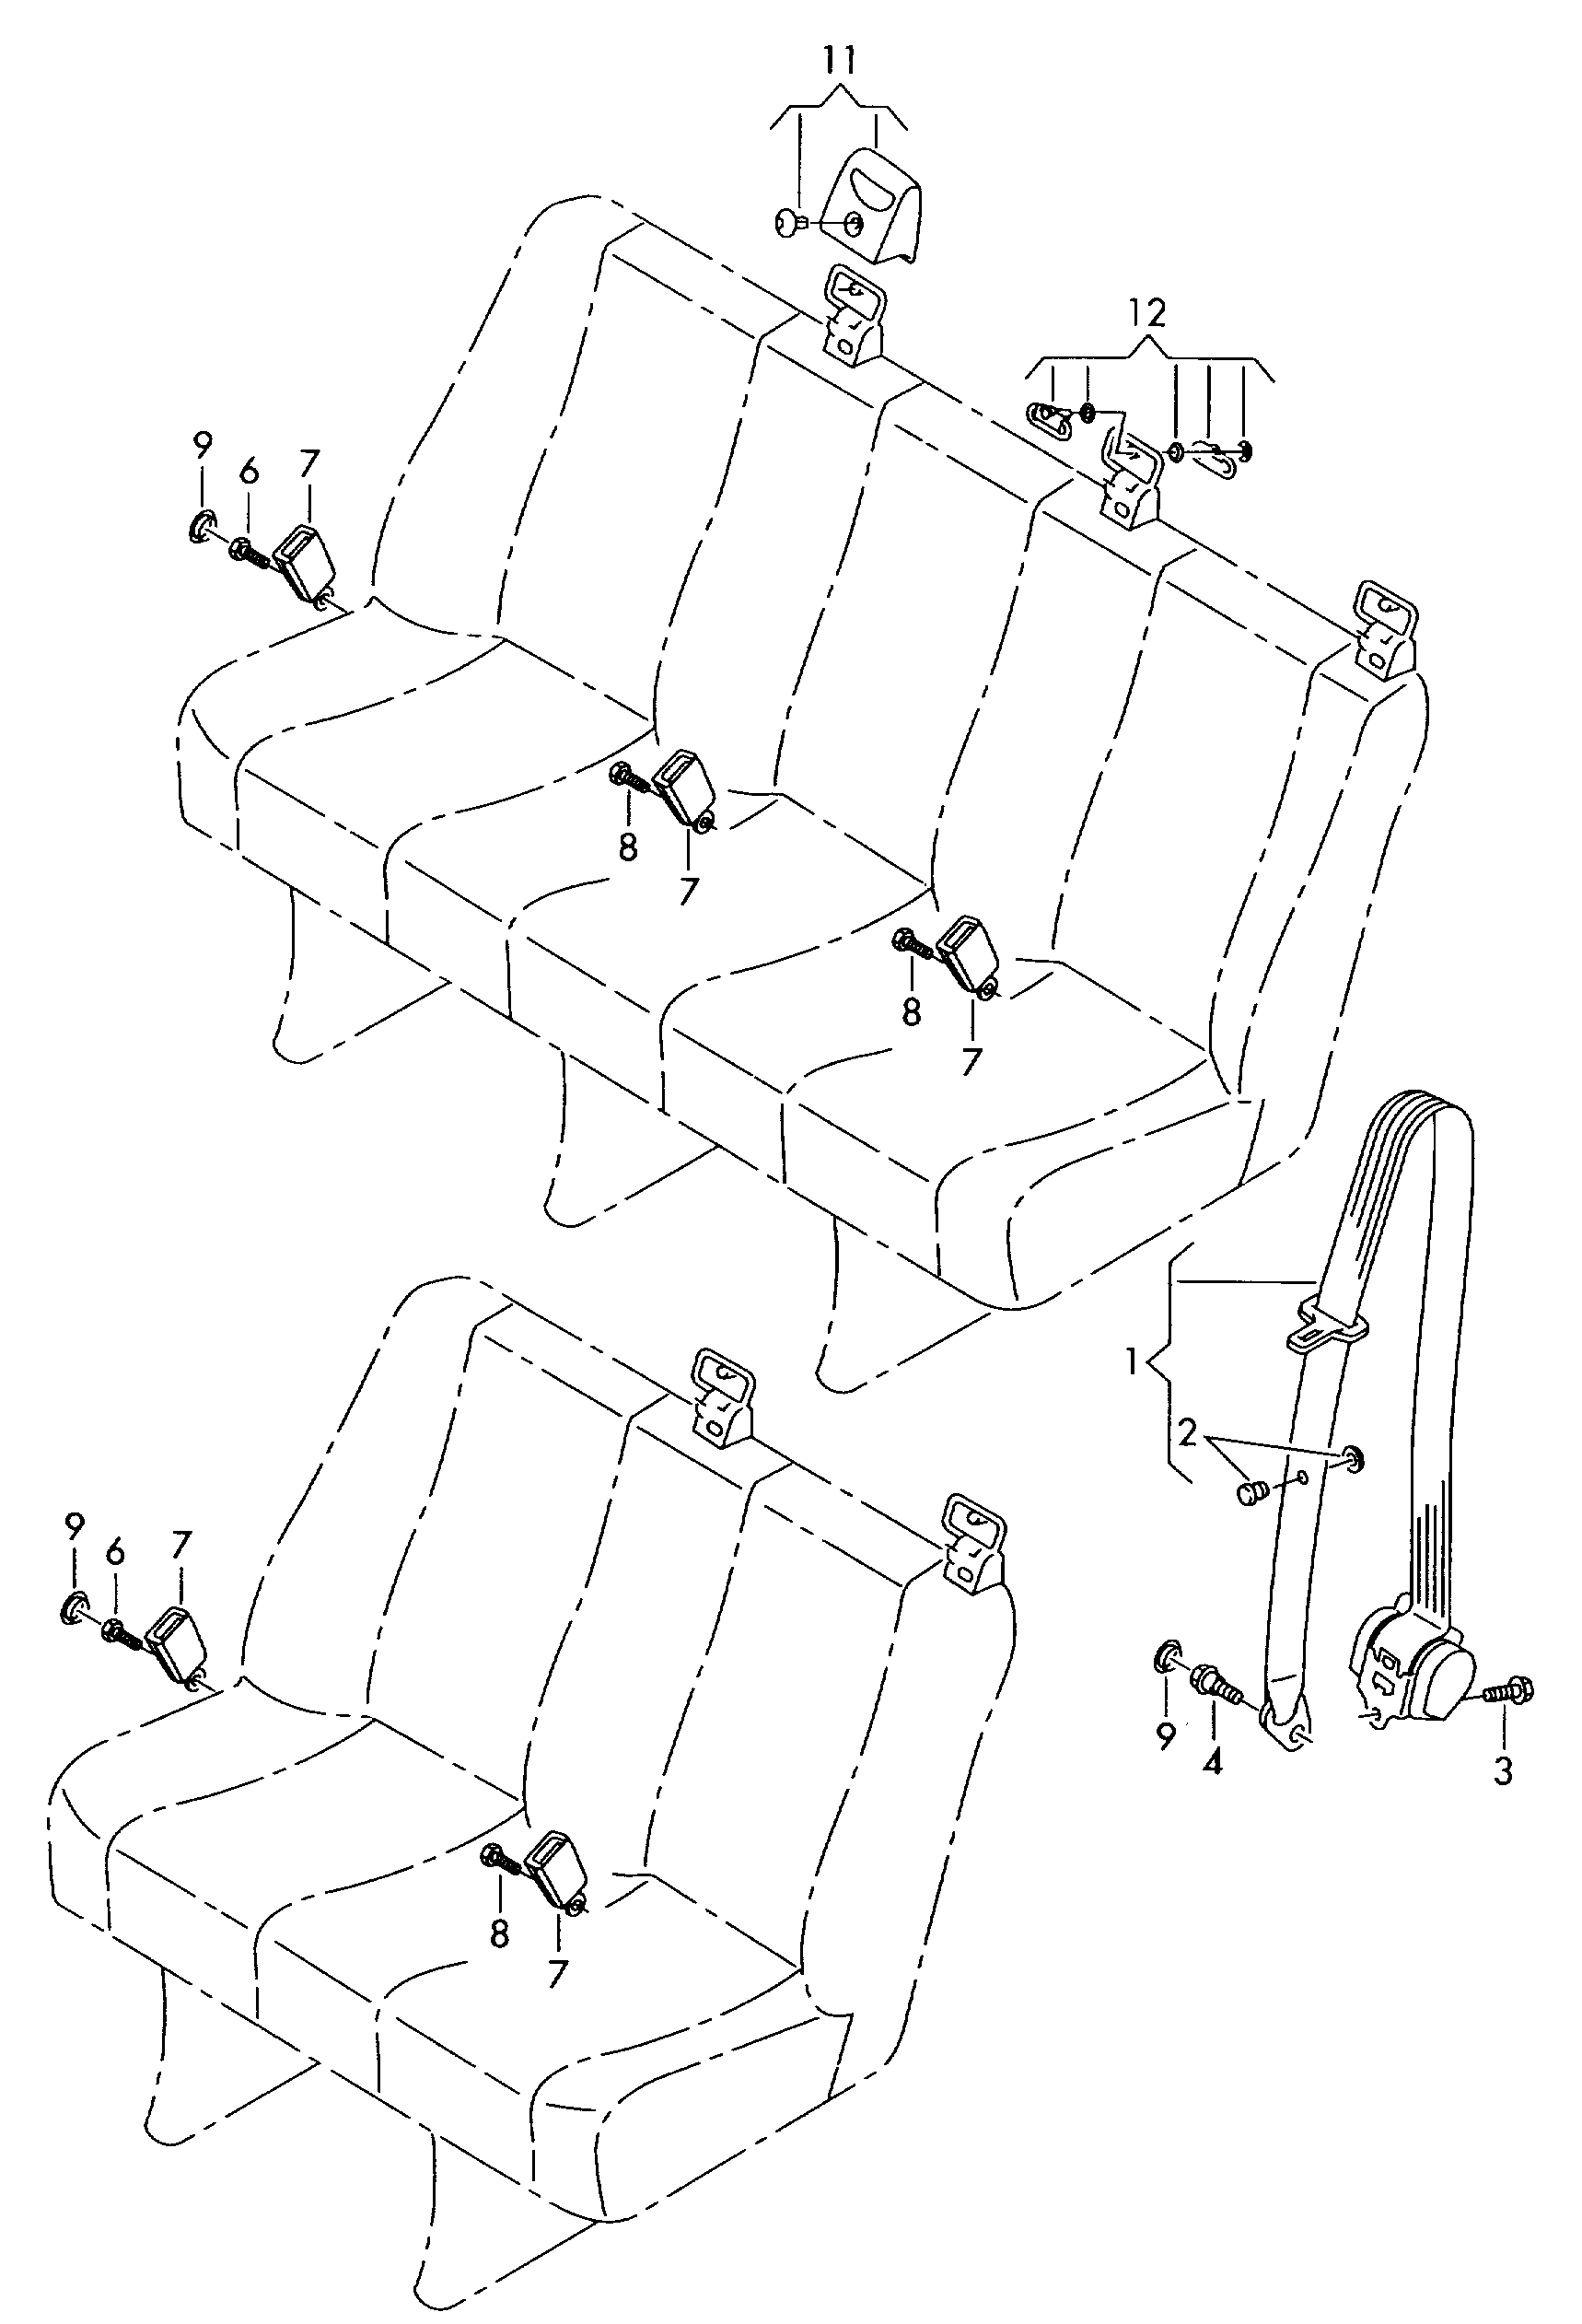 three-point seat belt in<br>passenger compartment 2. seat bench - Crafter - cr